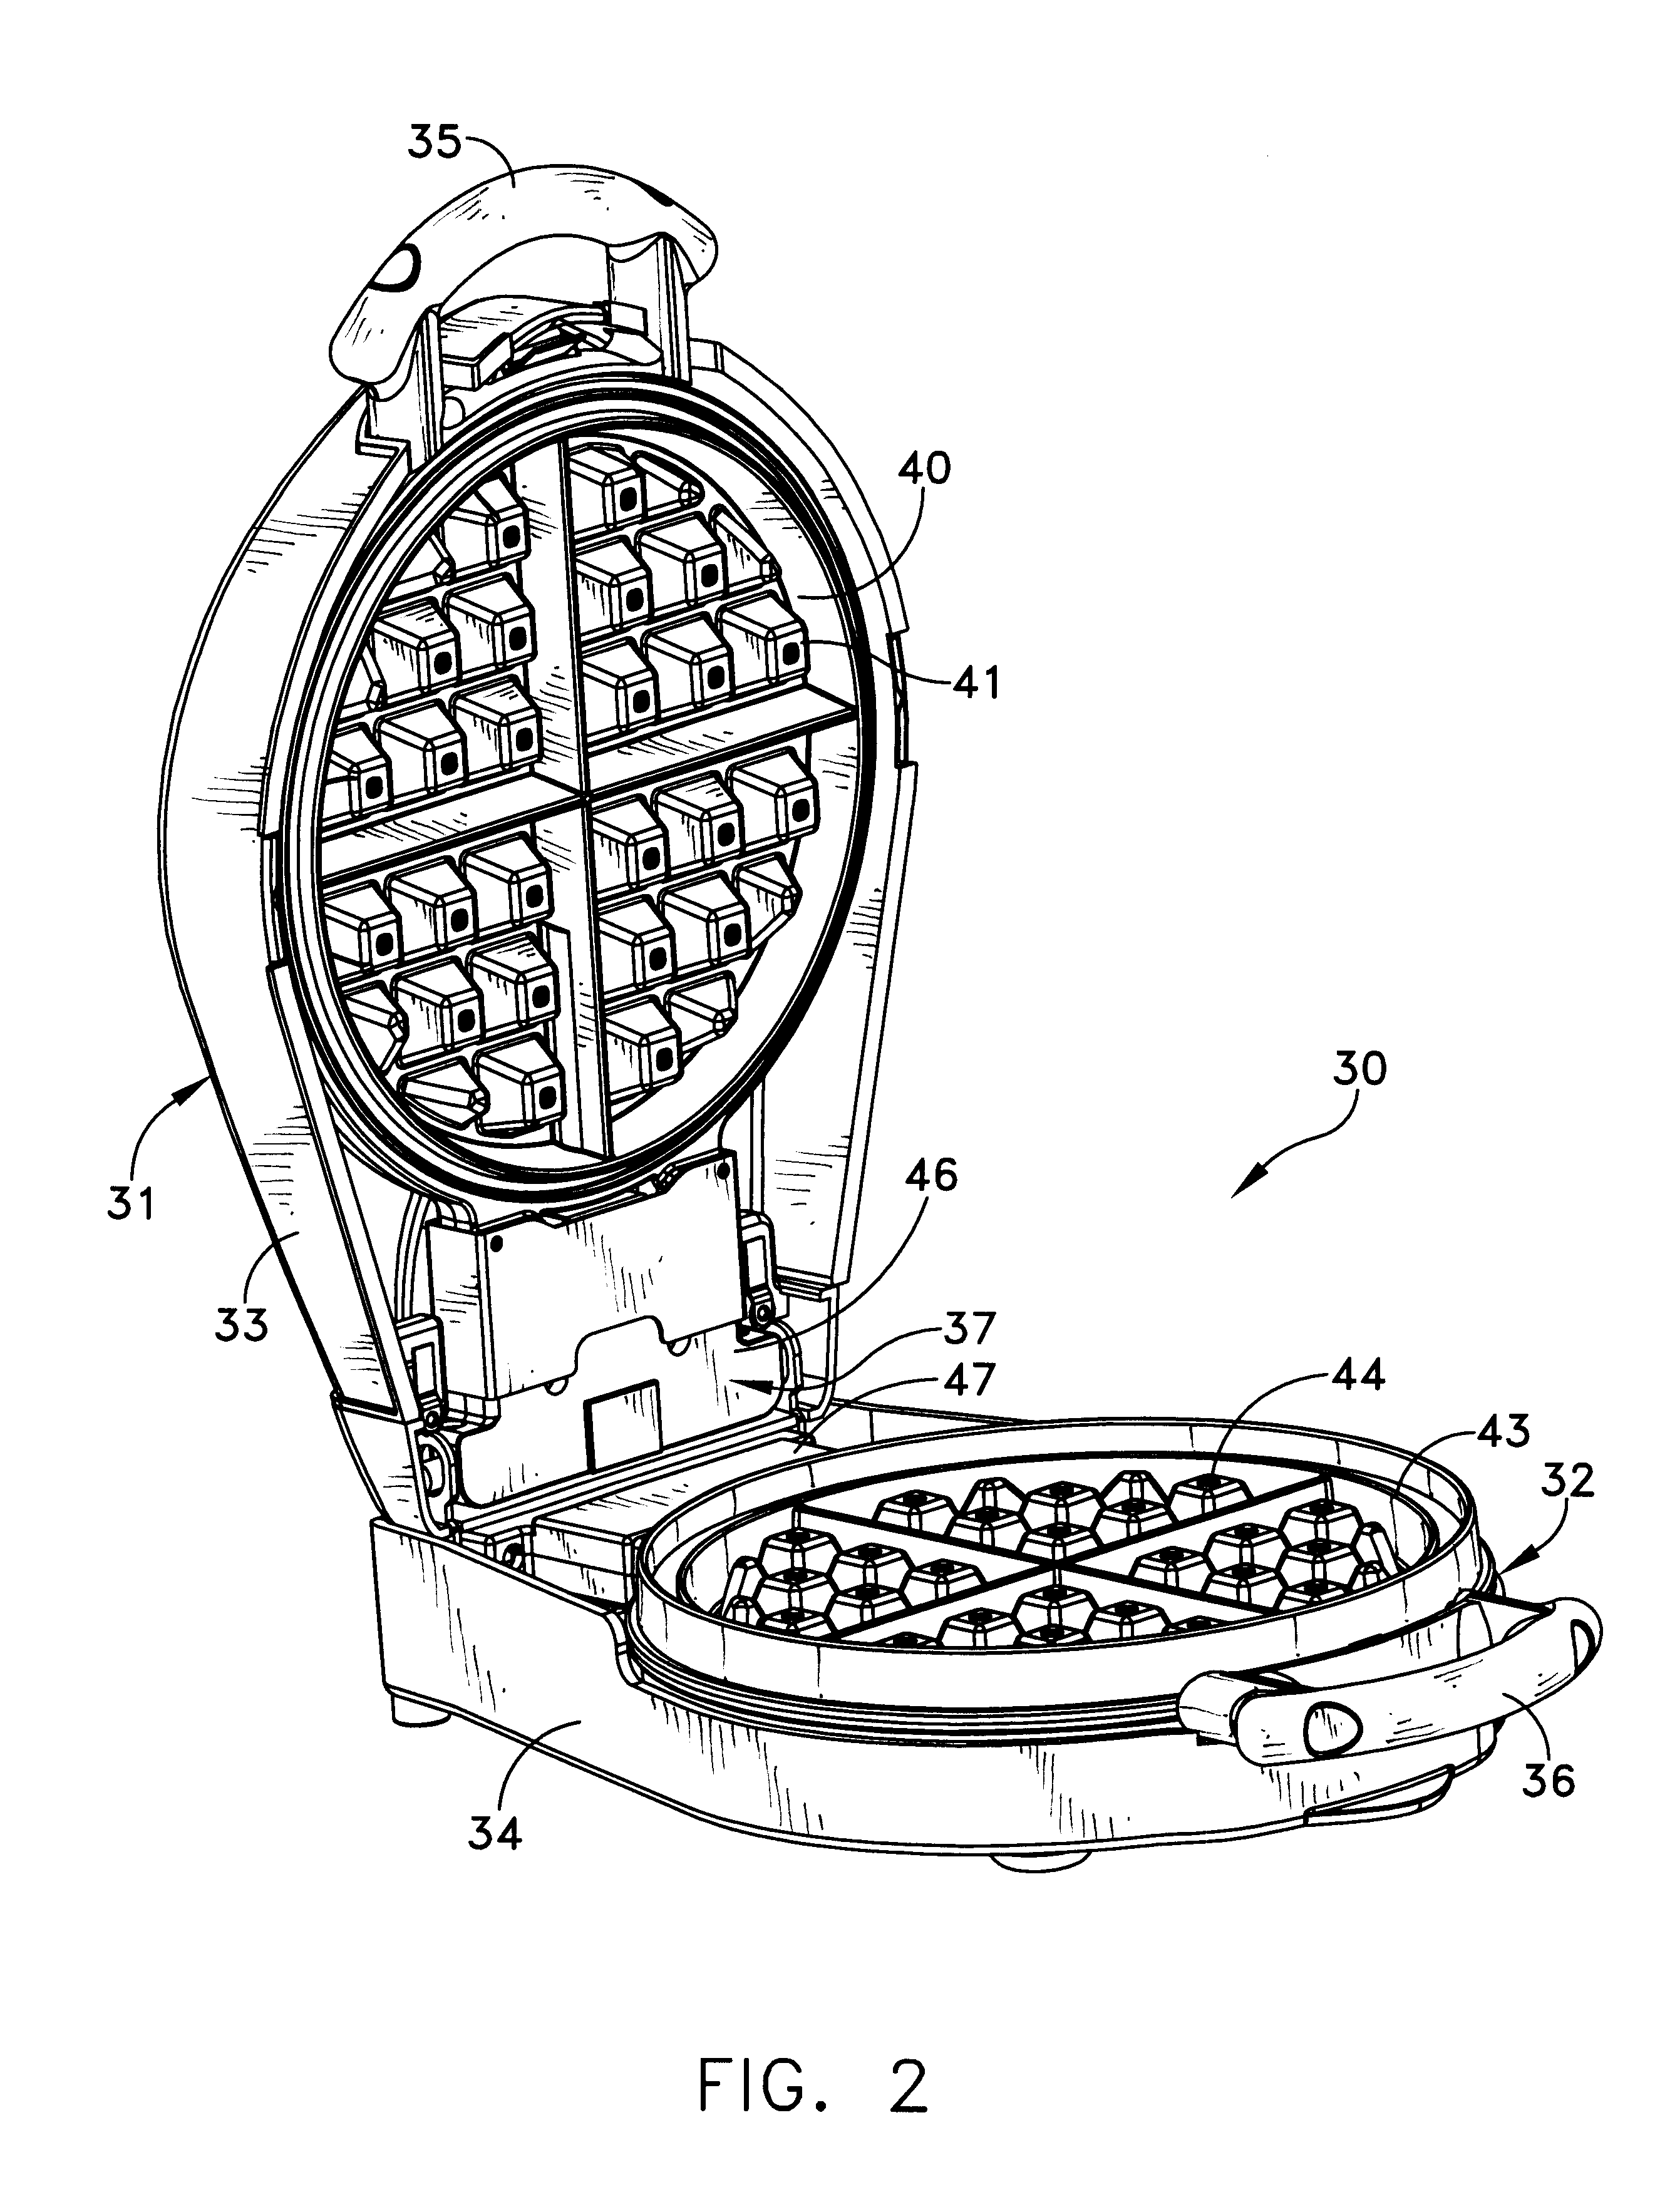 Electric cooking appliance with reversible cooking elements